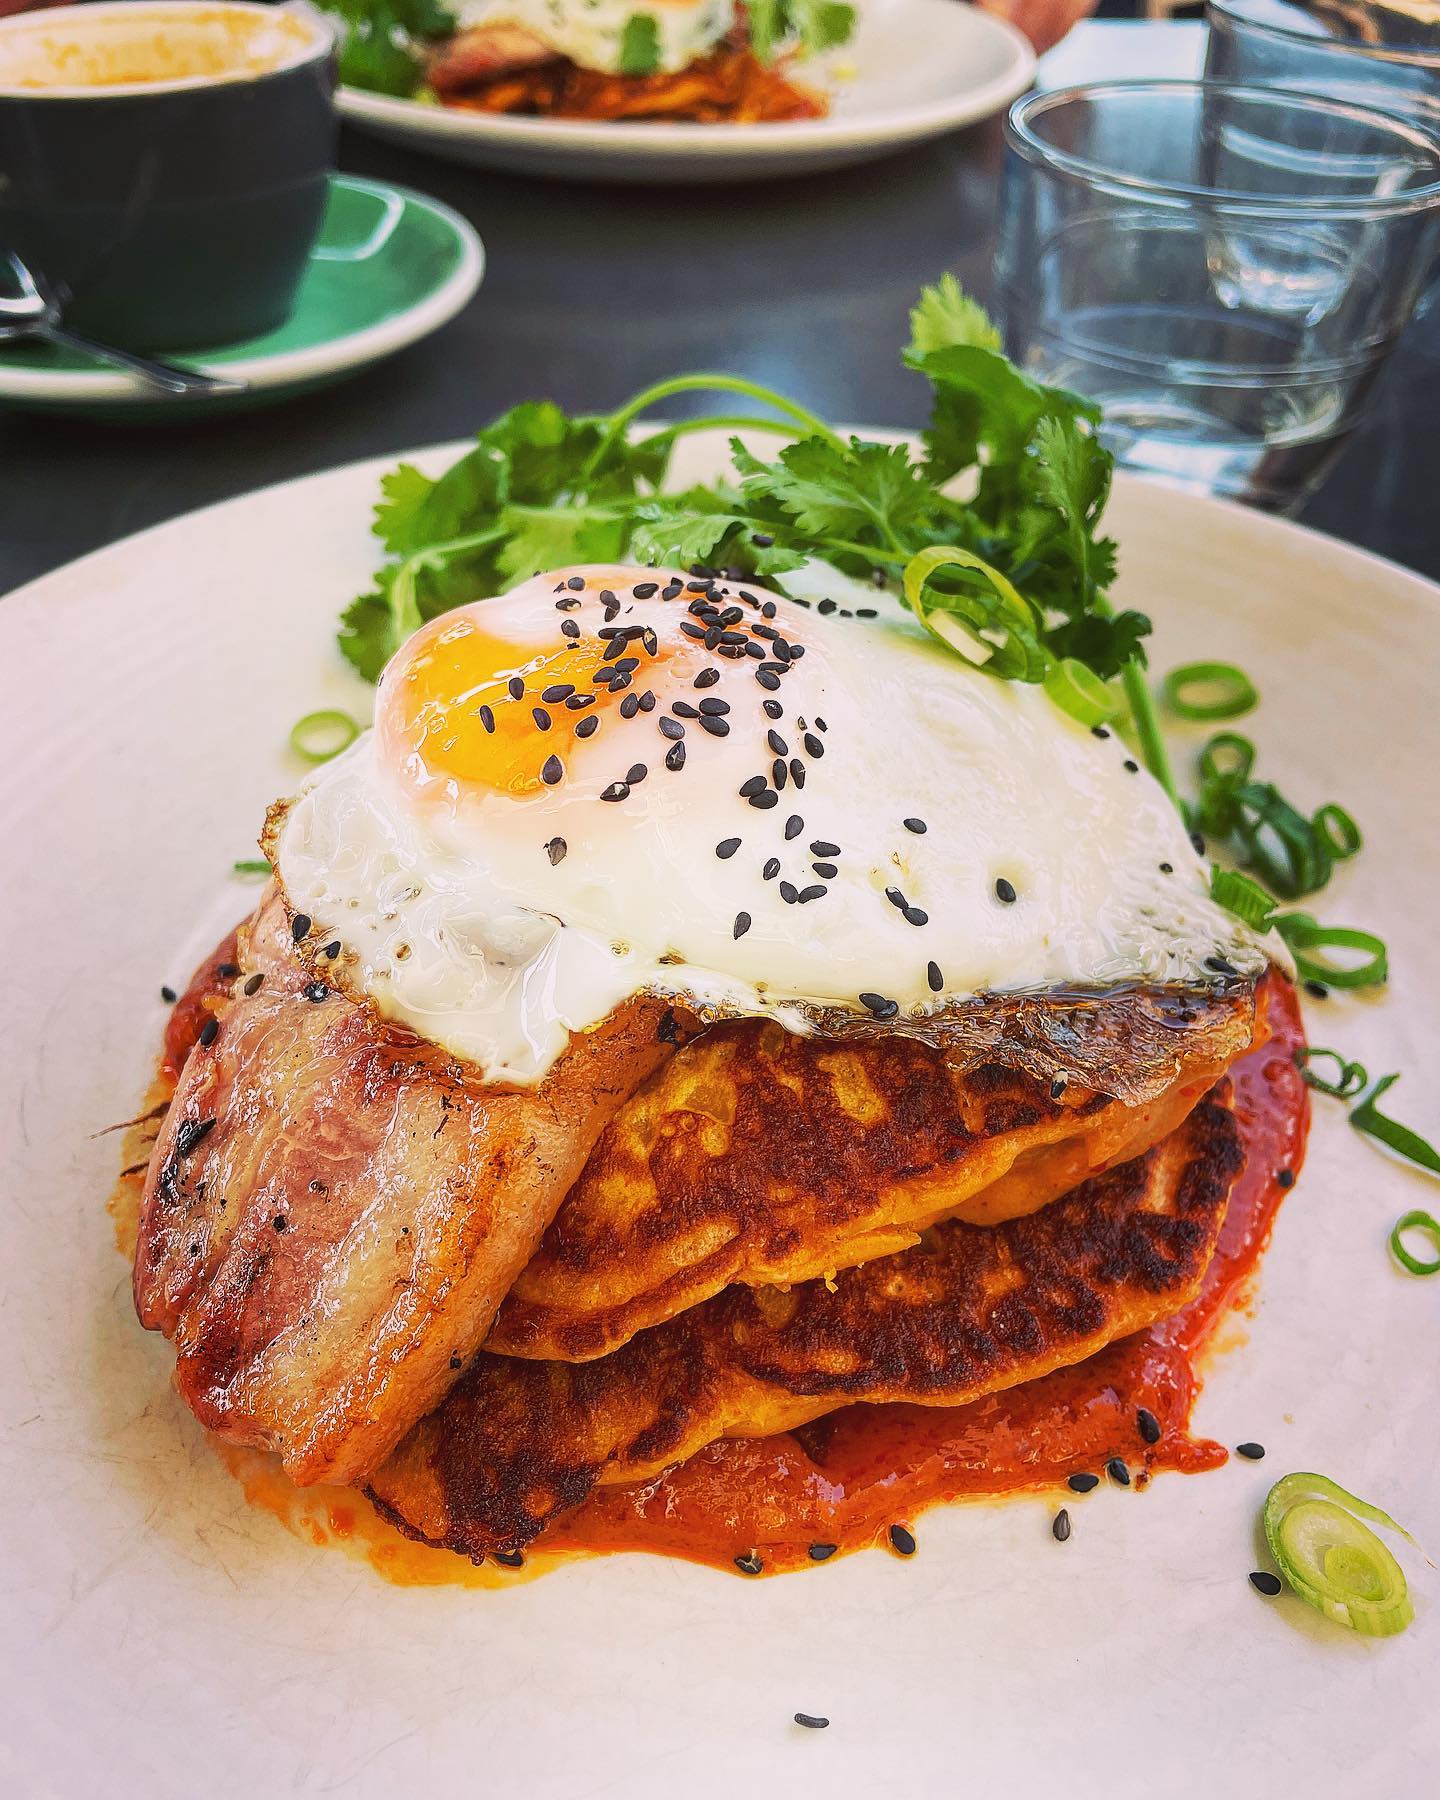 Brunch in the sun @caravanrestaurants 

In London this weekend and the sun is out ☀️ Headed to Caravan for brunch and had this amazing dish of Bacon Chop, Kimchi Pancake, Fried Egg and Gochujang Ketchup 🤤 

Any suggestions for the rest of the weekend? Drinks/dinner outside to enjoy the weather 🌞 

#london #brunch #caravan #kingscross #granarysquare #korean #kimchipancake #breakfast #documentingmydinner #foodblogger #londonfood